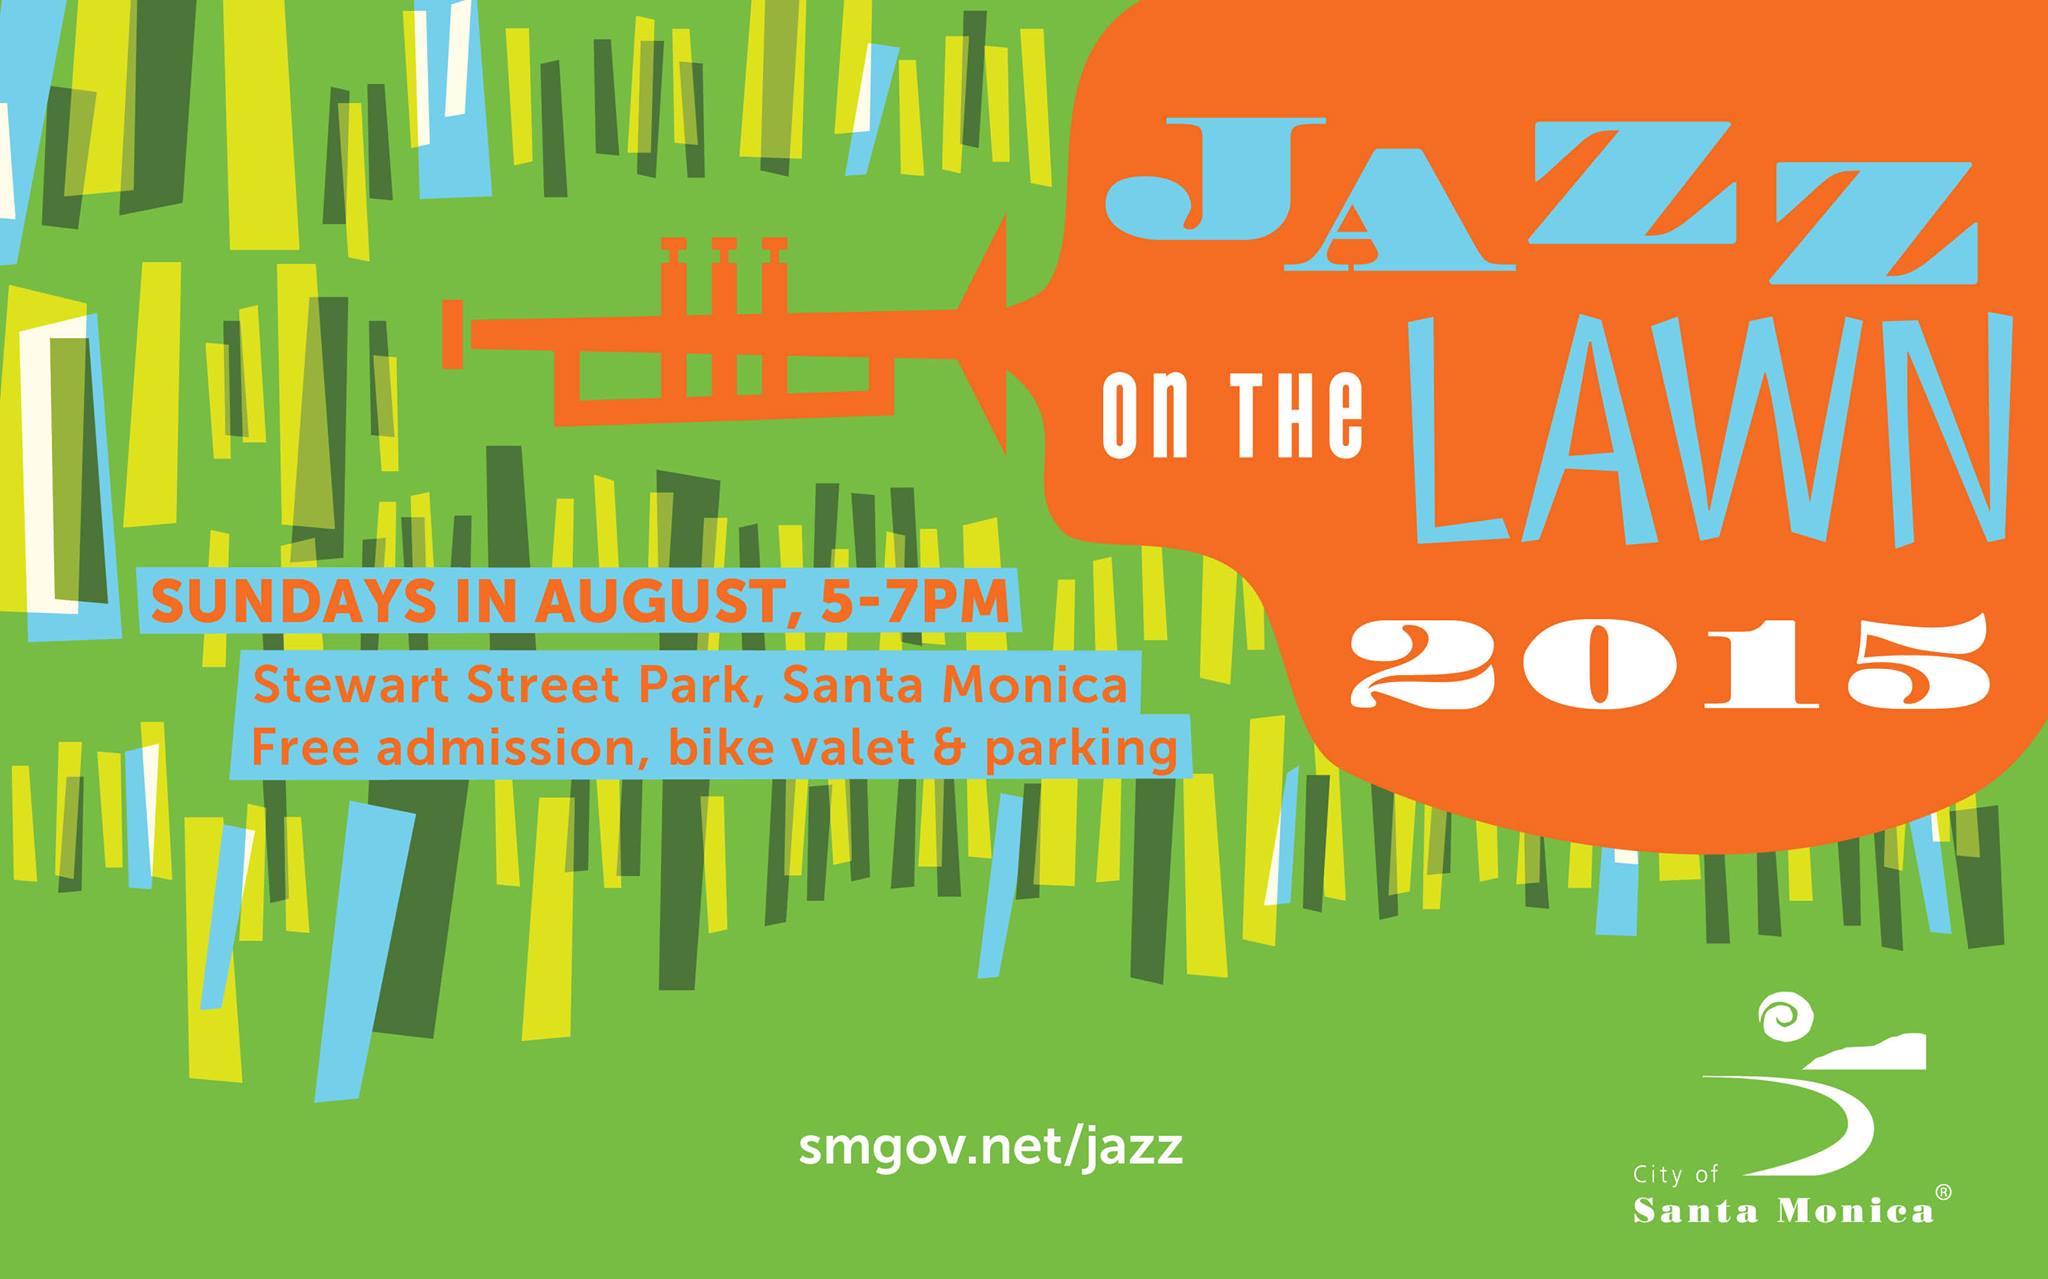 Jazz on the Lawn 2015